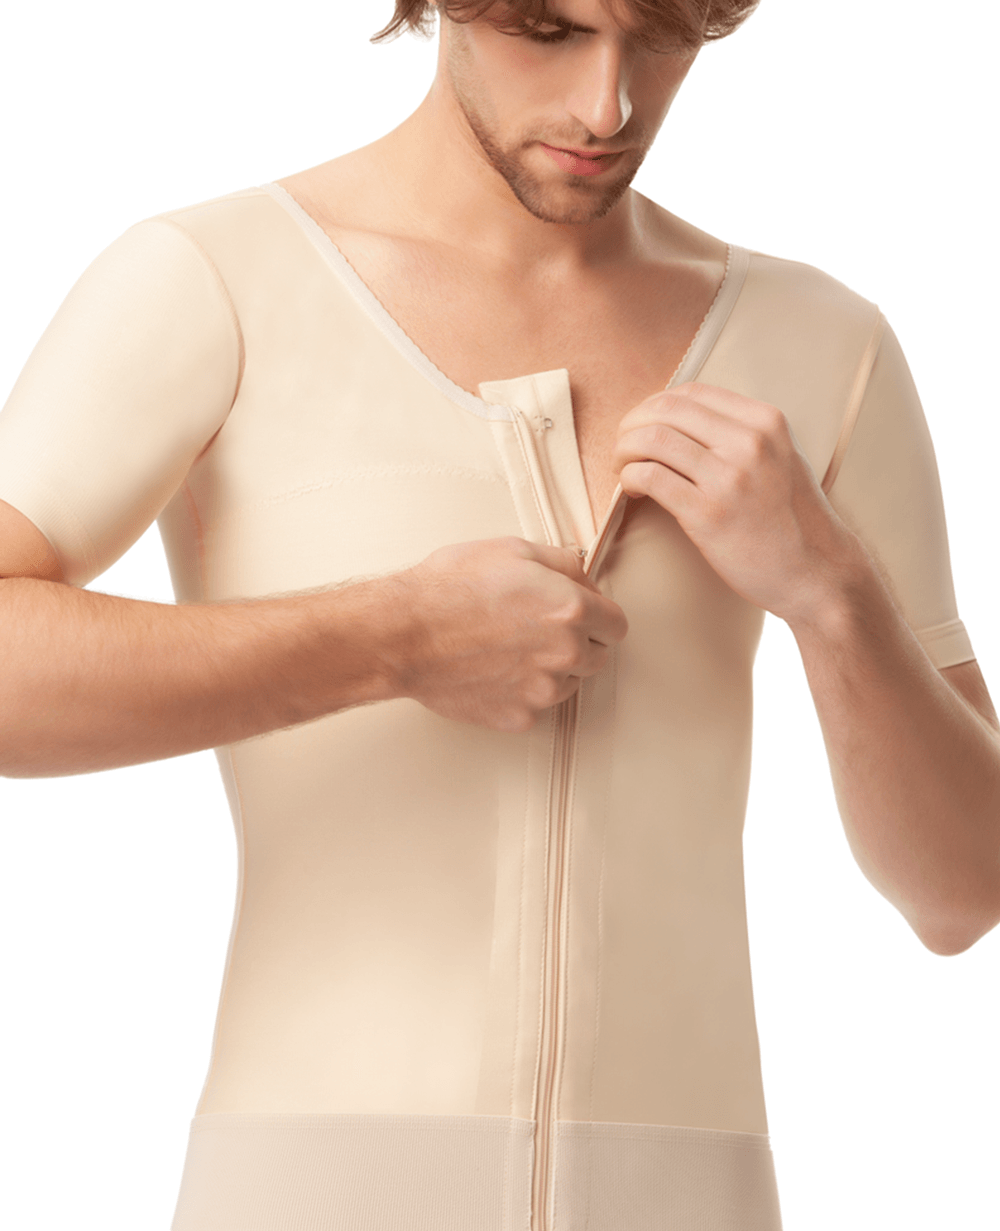 ABDOMINAL POST-SURGICAL COMPRESSION GARMENT WITH EXTENDED BACK